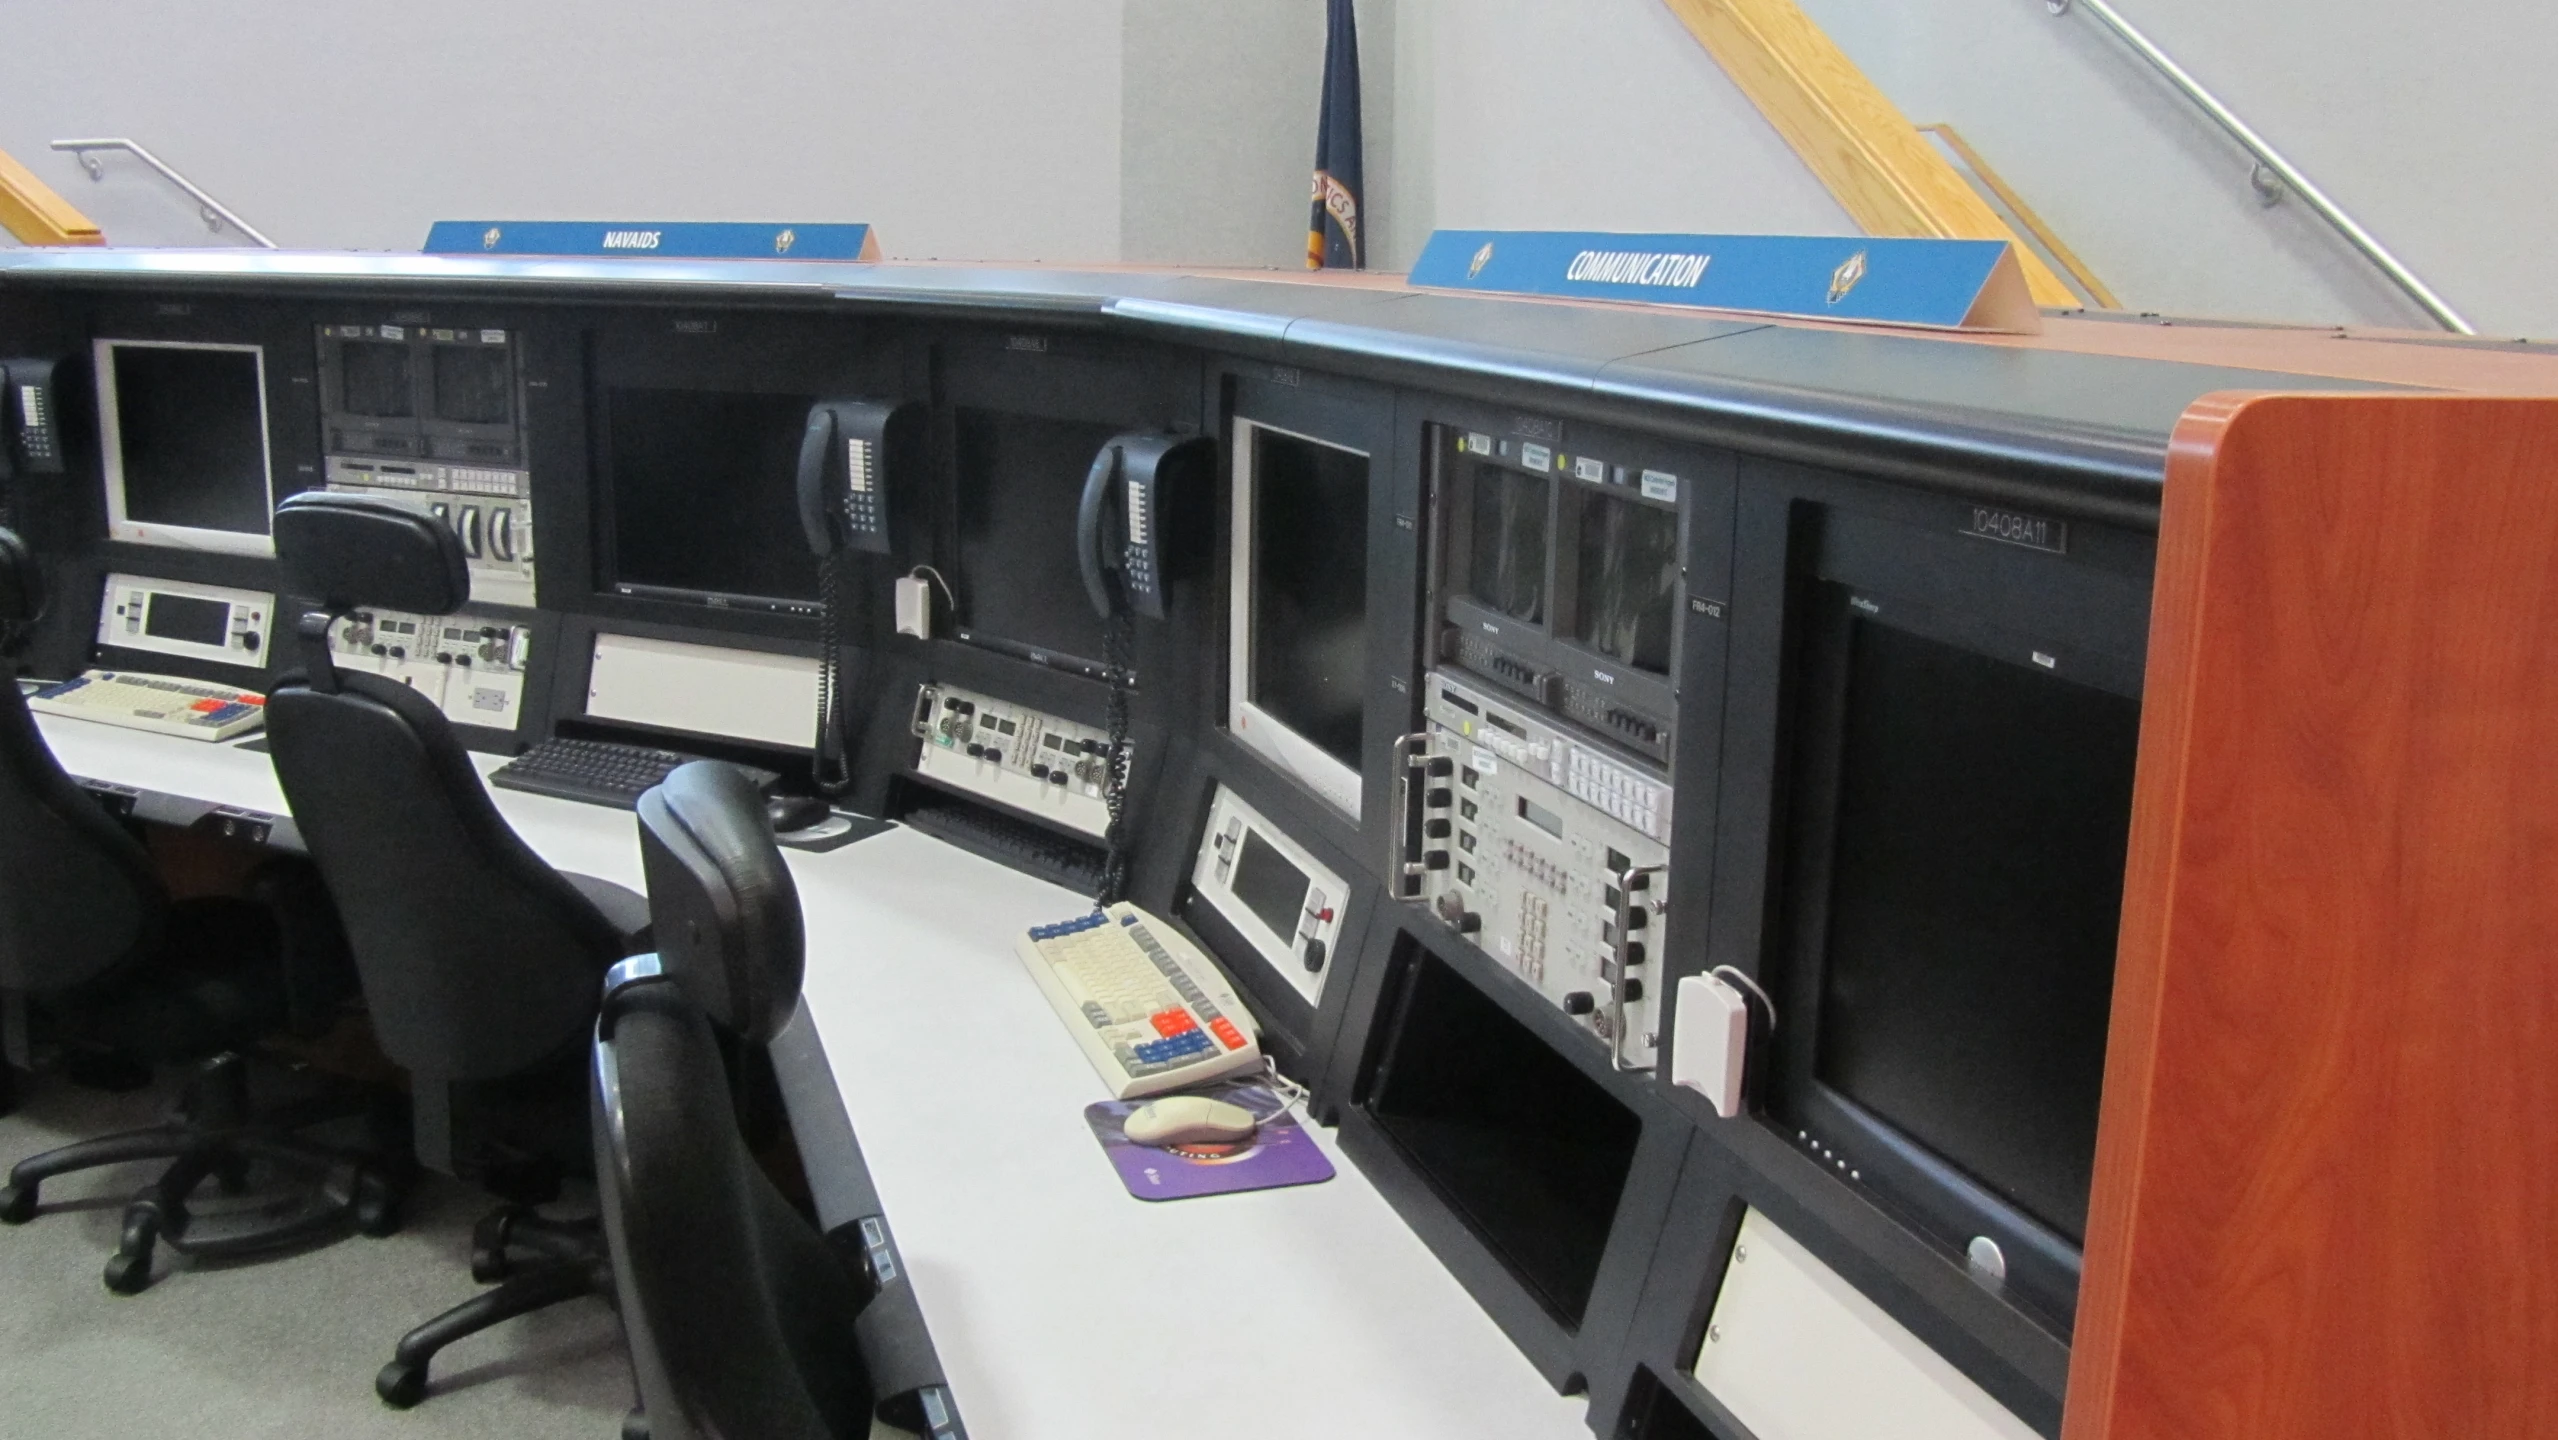 a po of an electronic control room for people